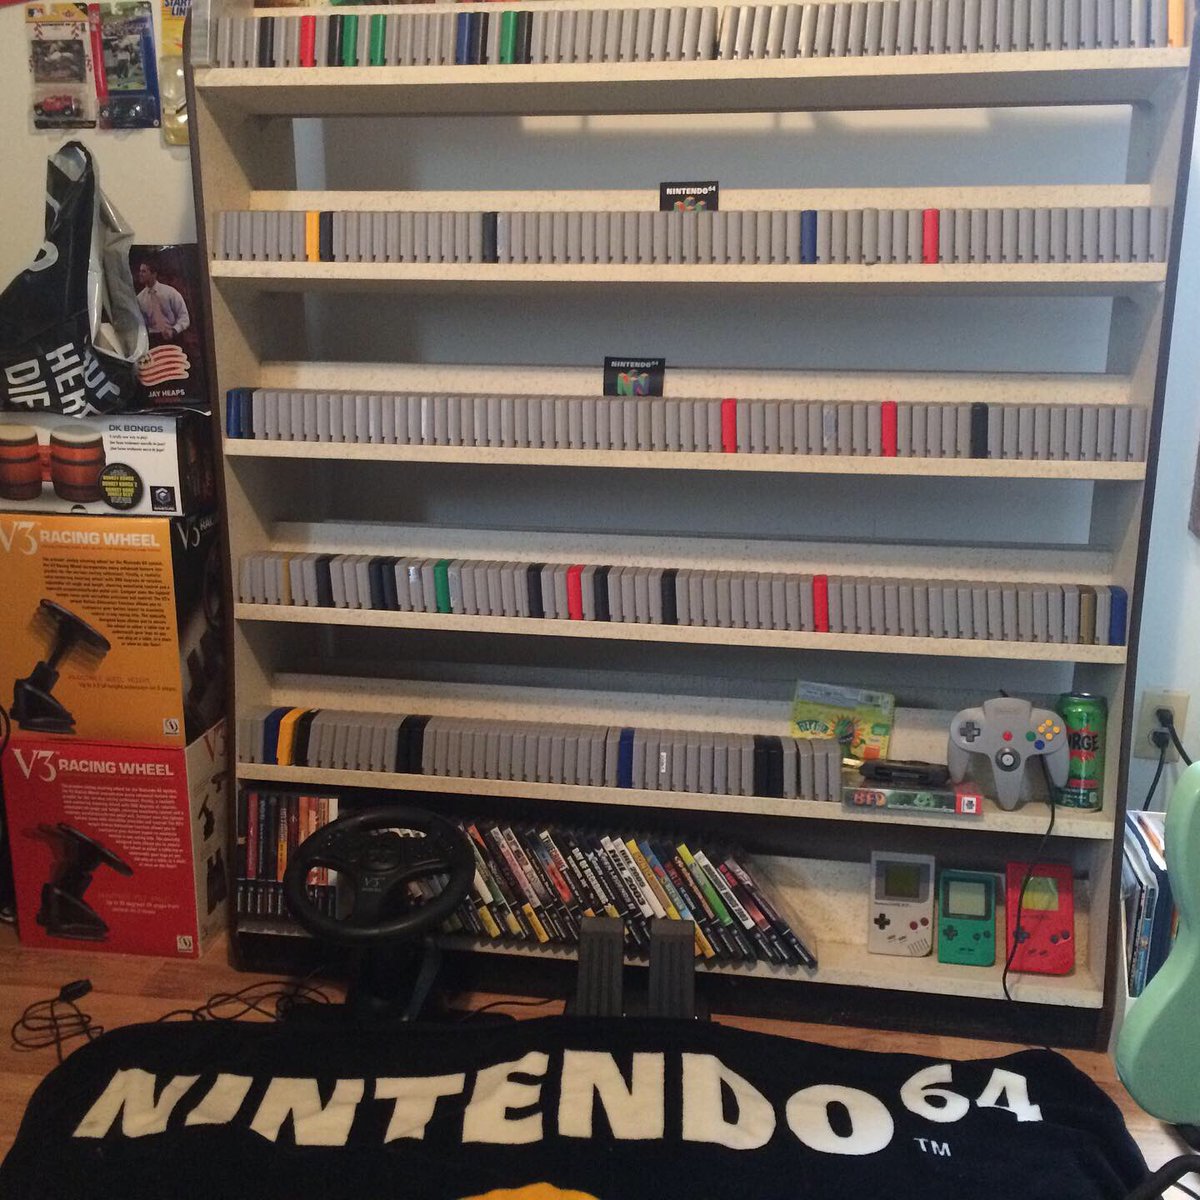 Every US N64 + a few Jap. and a few unreleased games and a few homebrew games for a total of 304 games 2 steering wheels 12 memory cards 3 rumble paks. 10 controllers @N64Today @n64thstreetgifs @N64Memories #N64collection